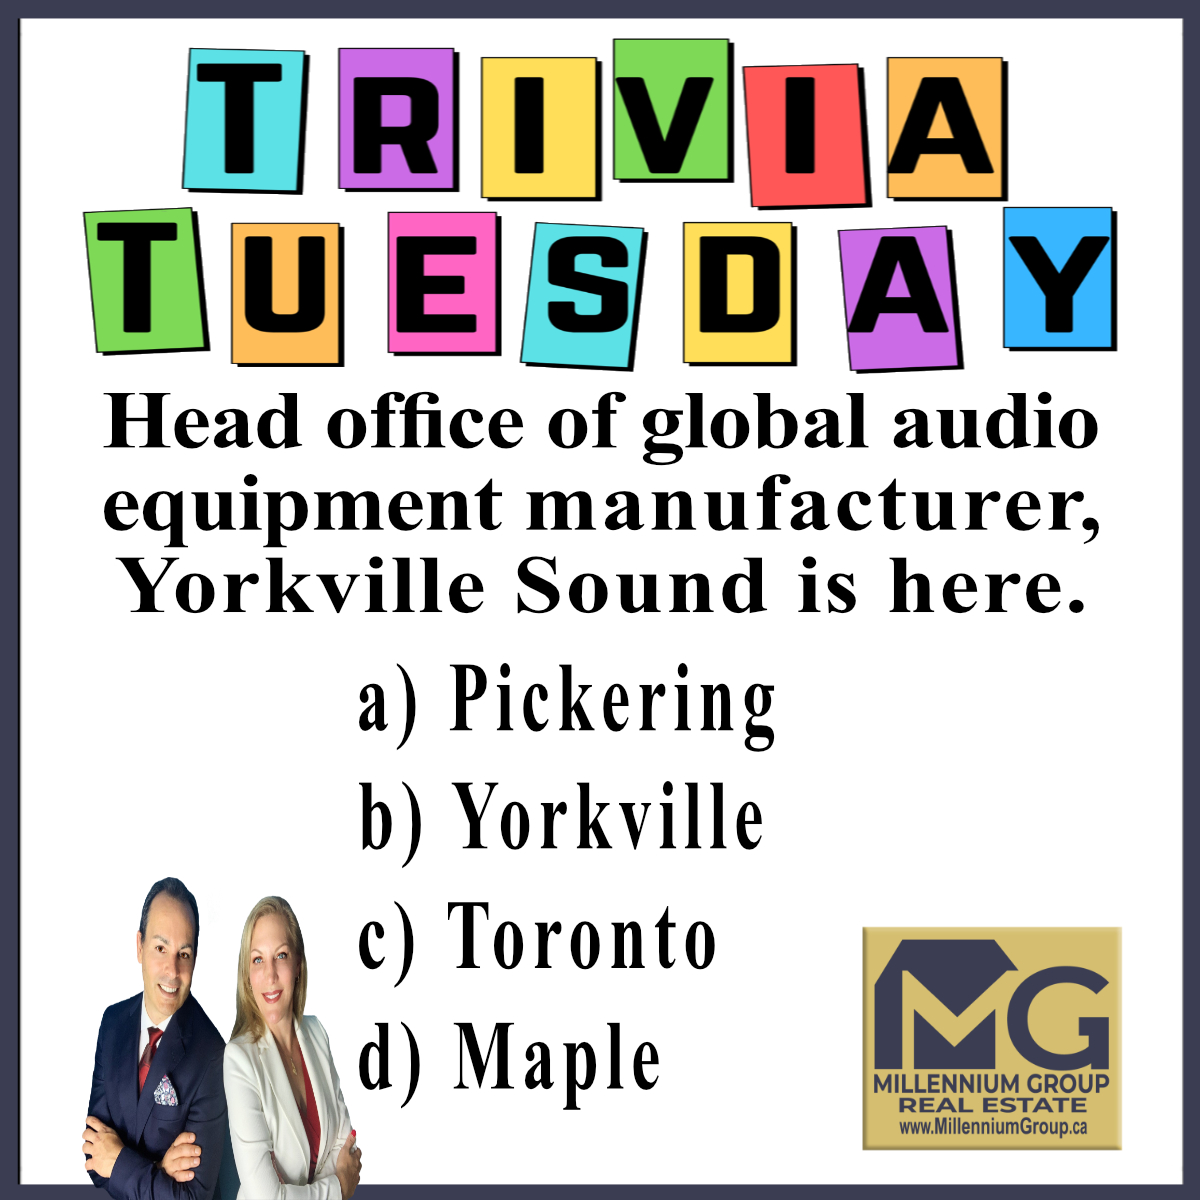 This area also used to have one of the best flea markets in Ontario. Sadly, after 47 years it shut down due to Covid 😕

#TuesdayTrivia #TriviaTuesday #NeighbourhoodTrivia #OntarioTrivia #KendraCutroneBroker #TonyCutroneRealtor #MillenniumGroupRealEstate #MillenniumGroup #MGRE